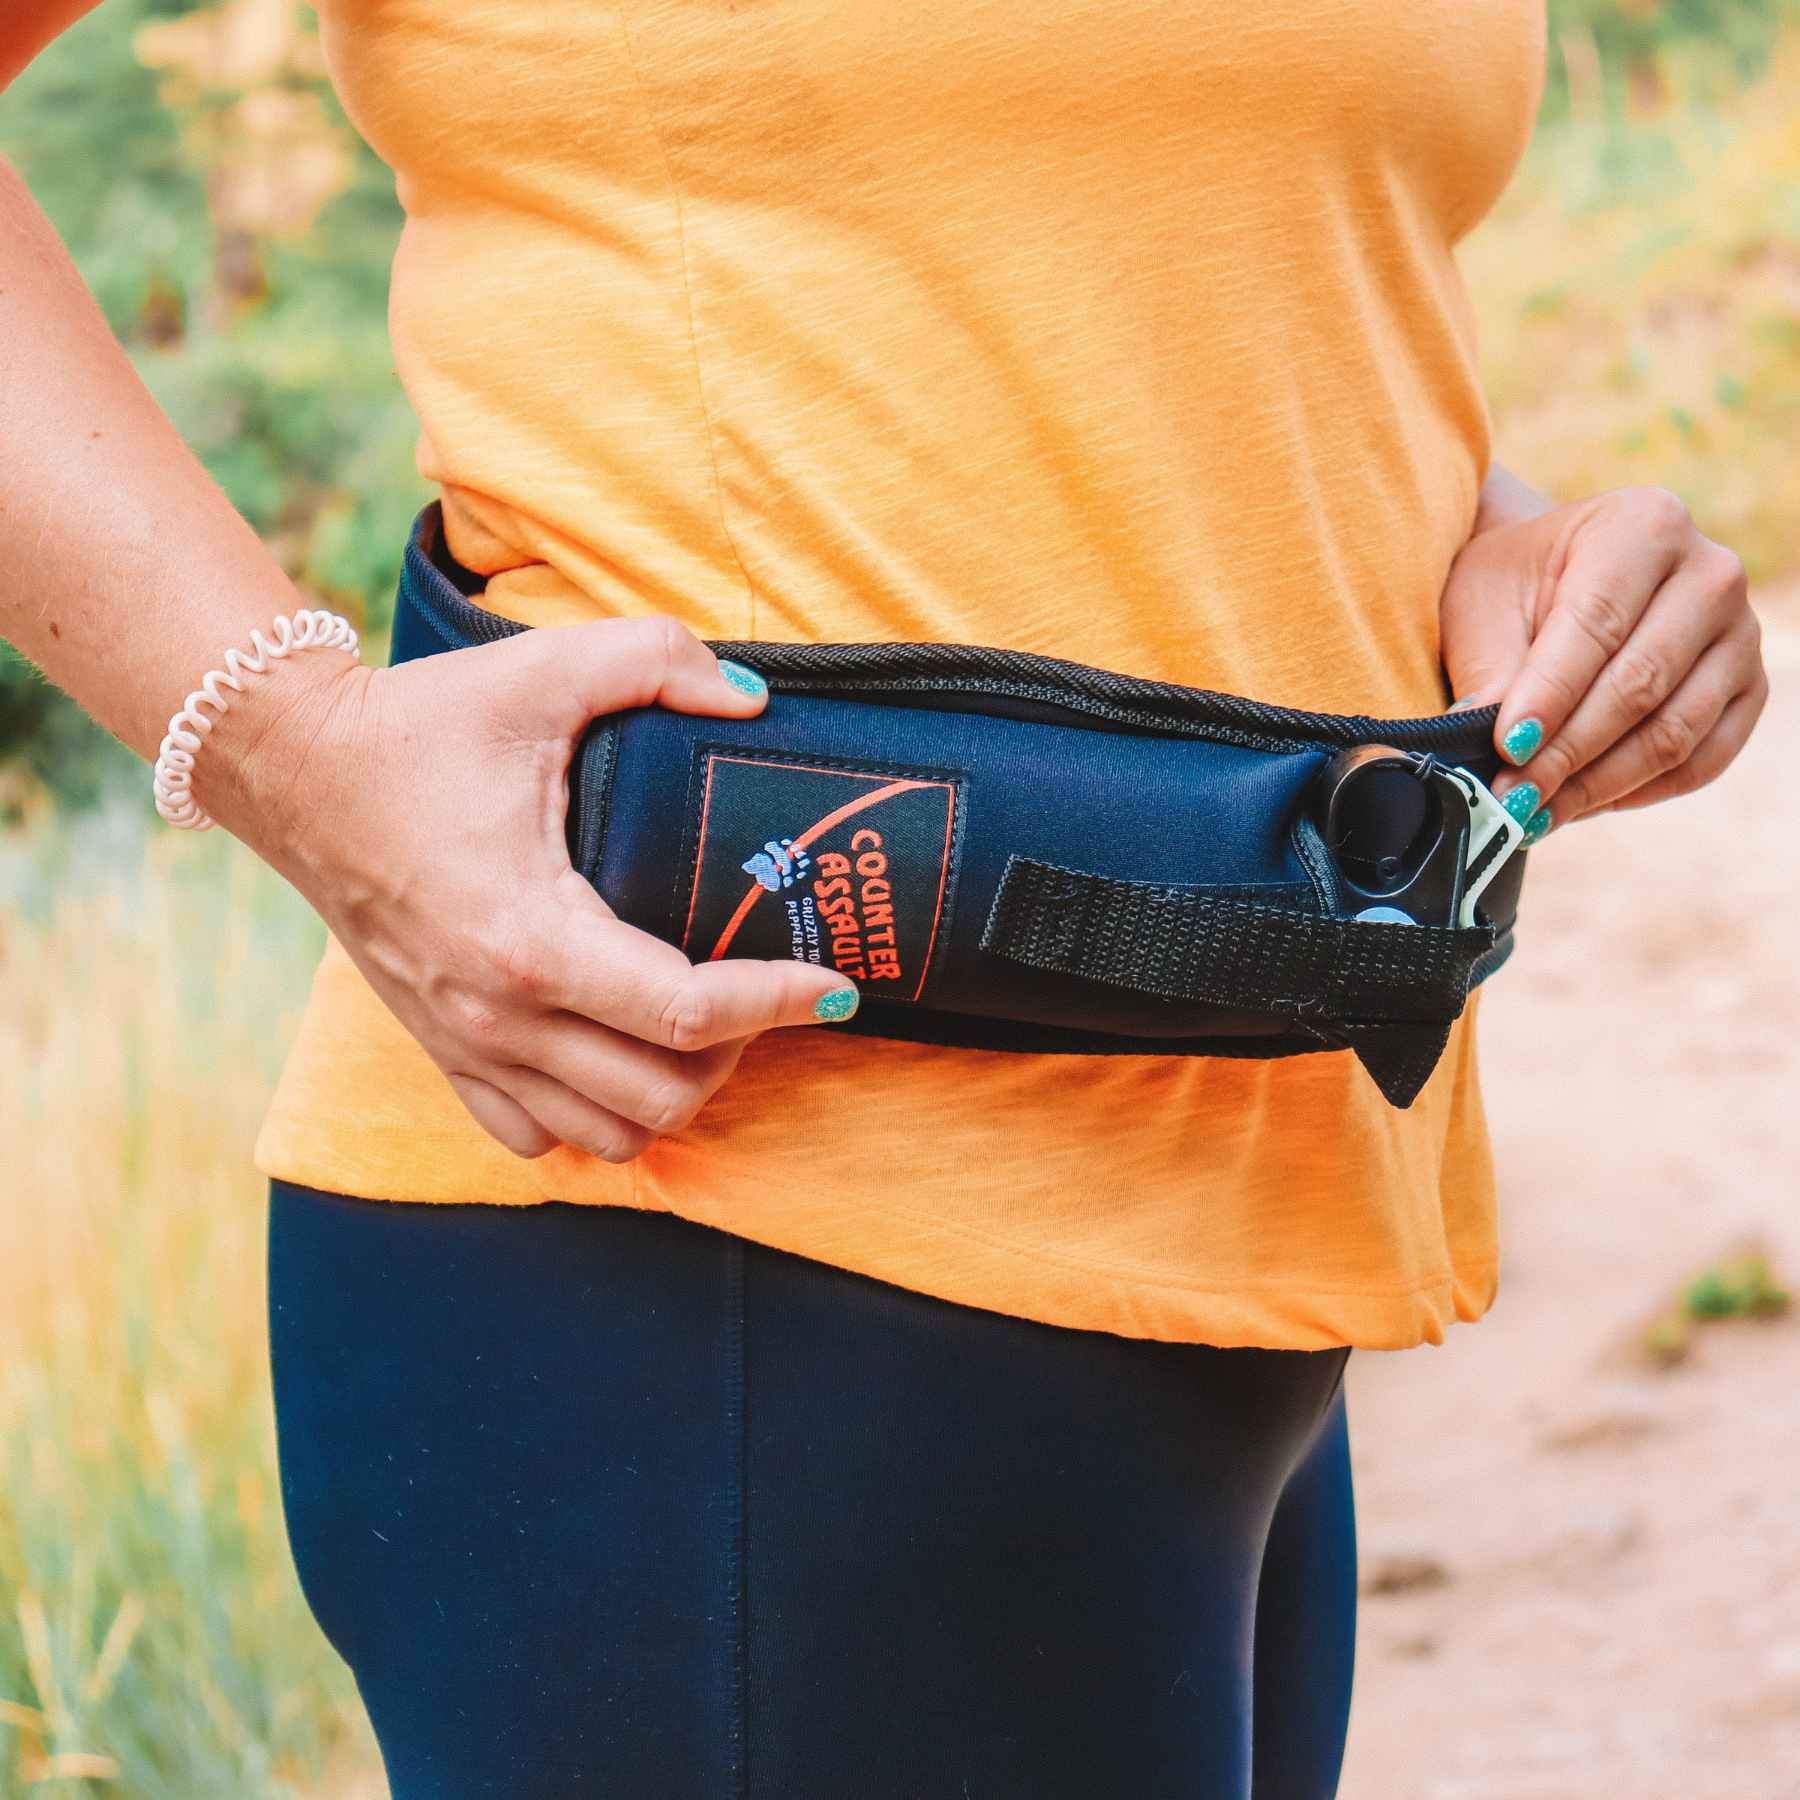 Trail Runner Holster with bear spray attached to the waist of person in orange shirt